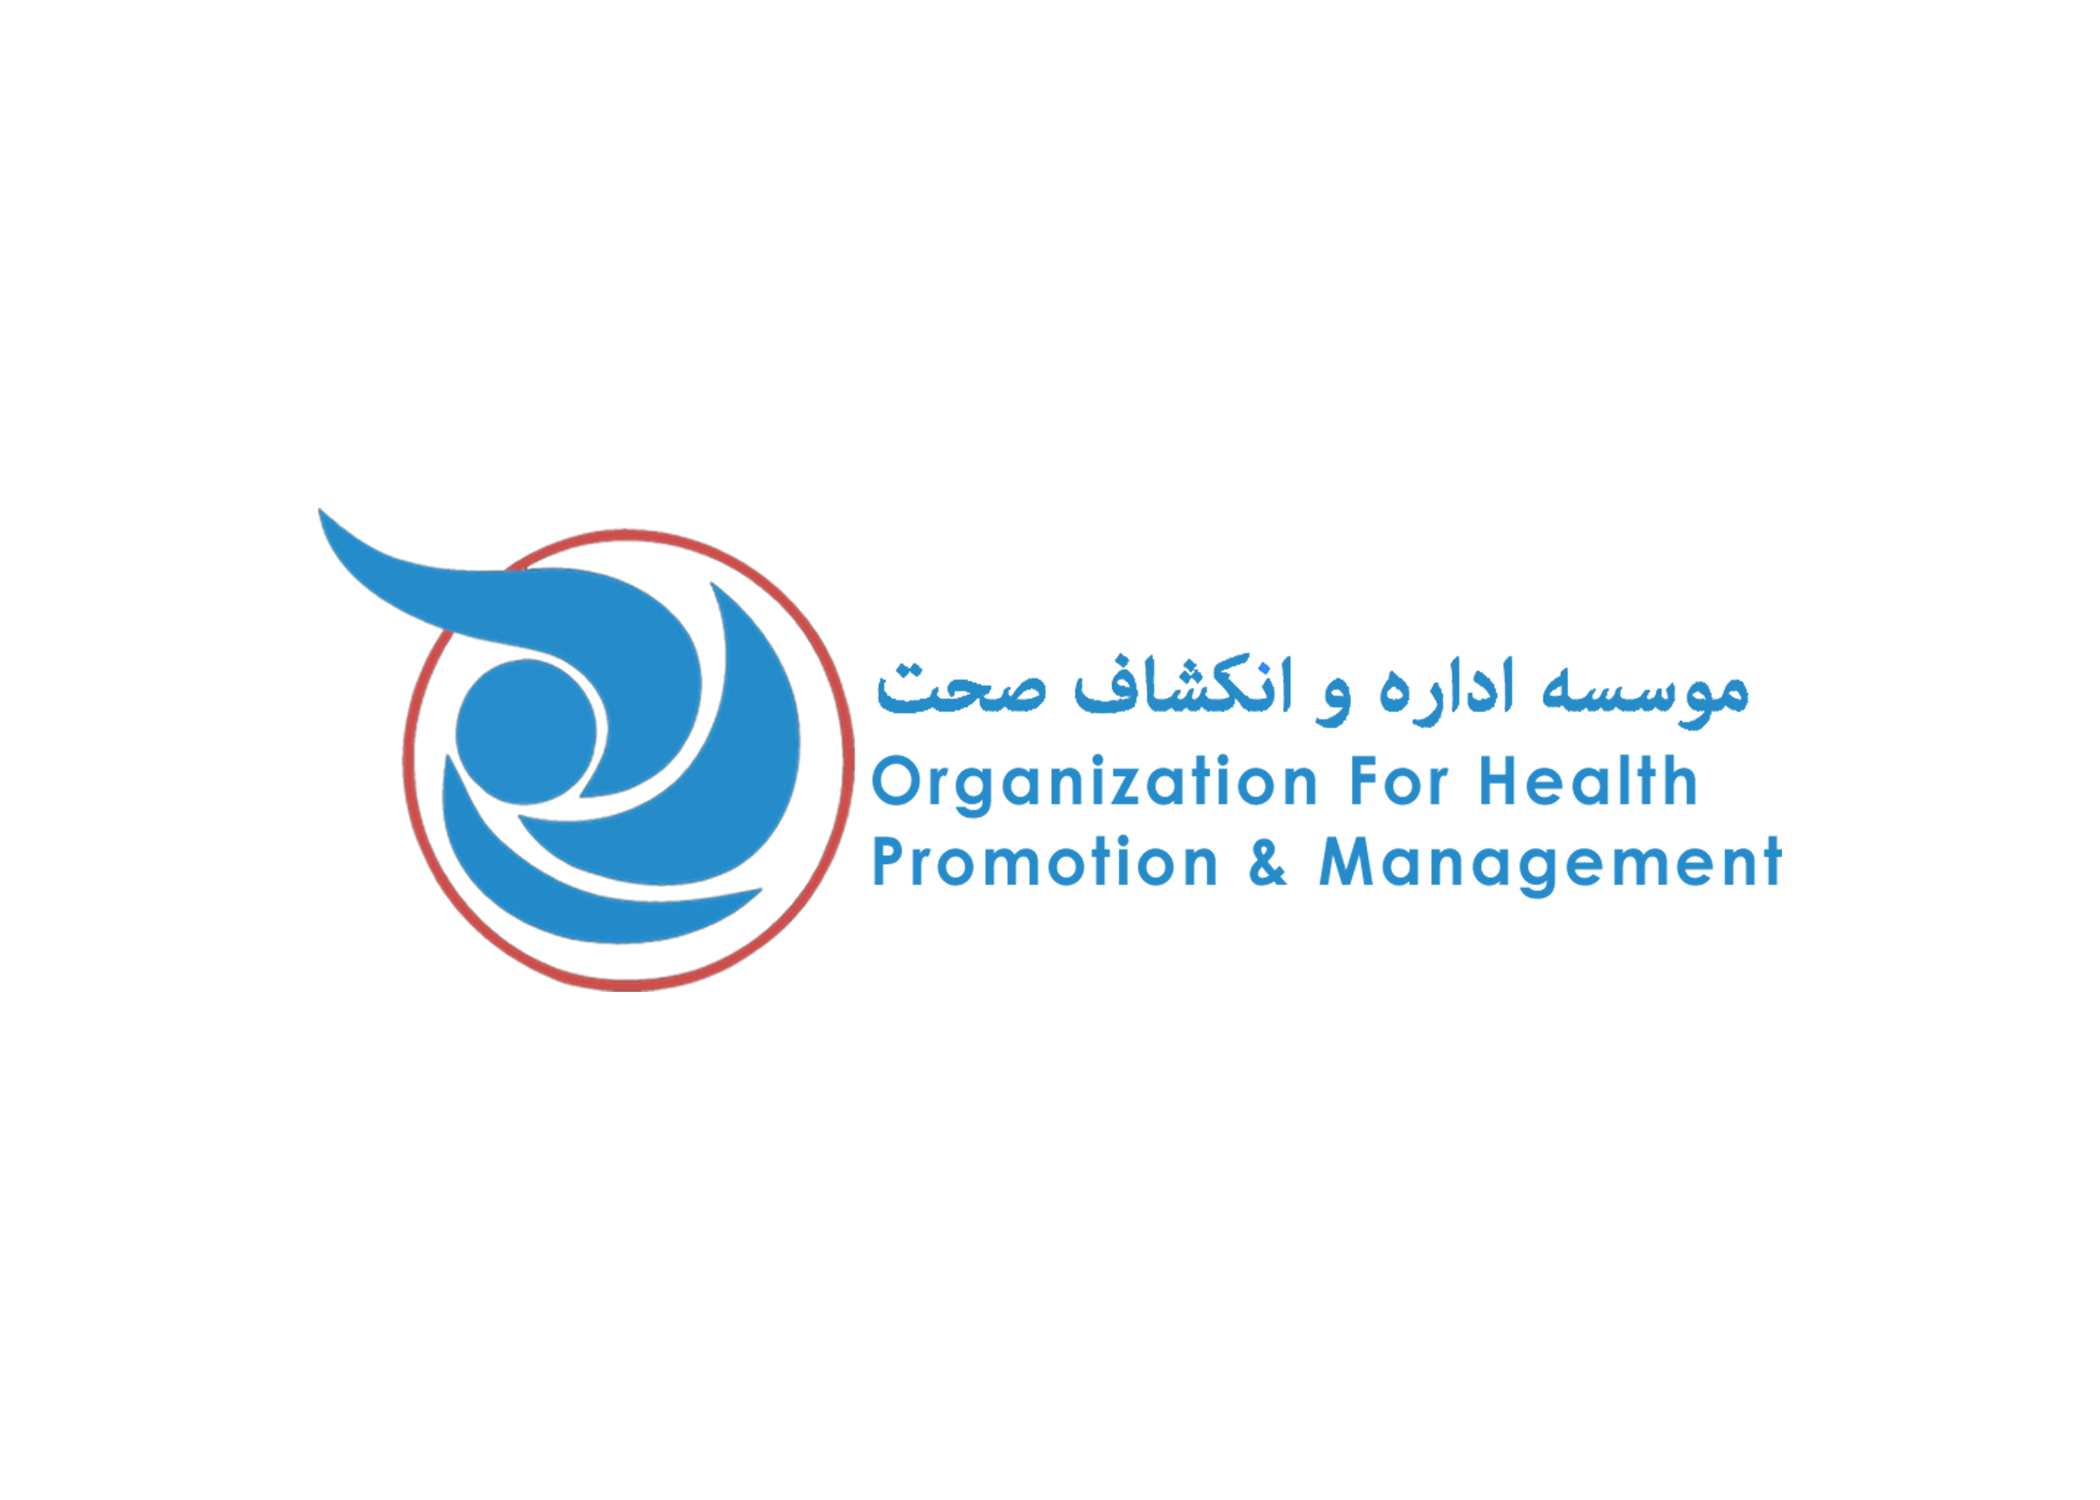 Organization for Health Promotion and Management (OHPM)